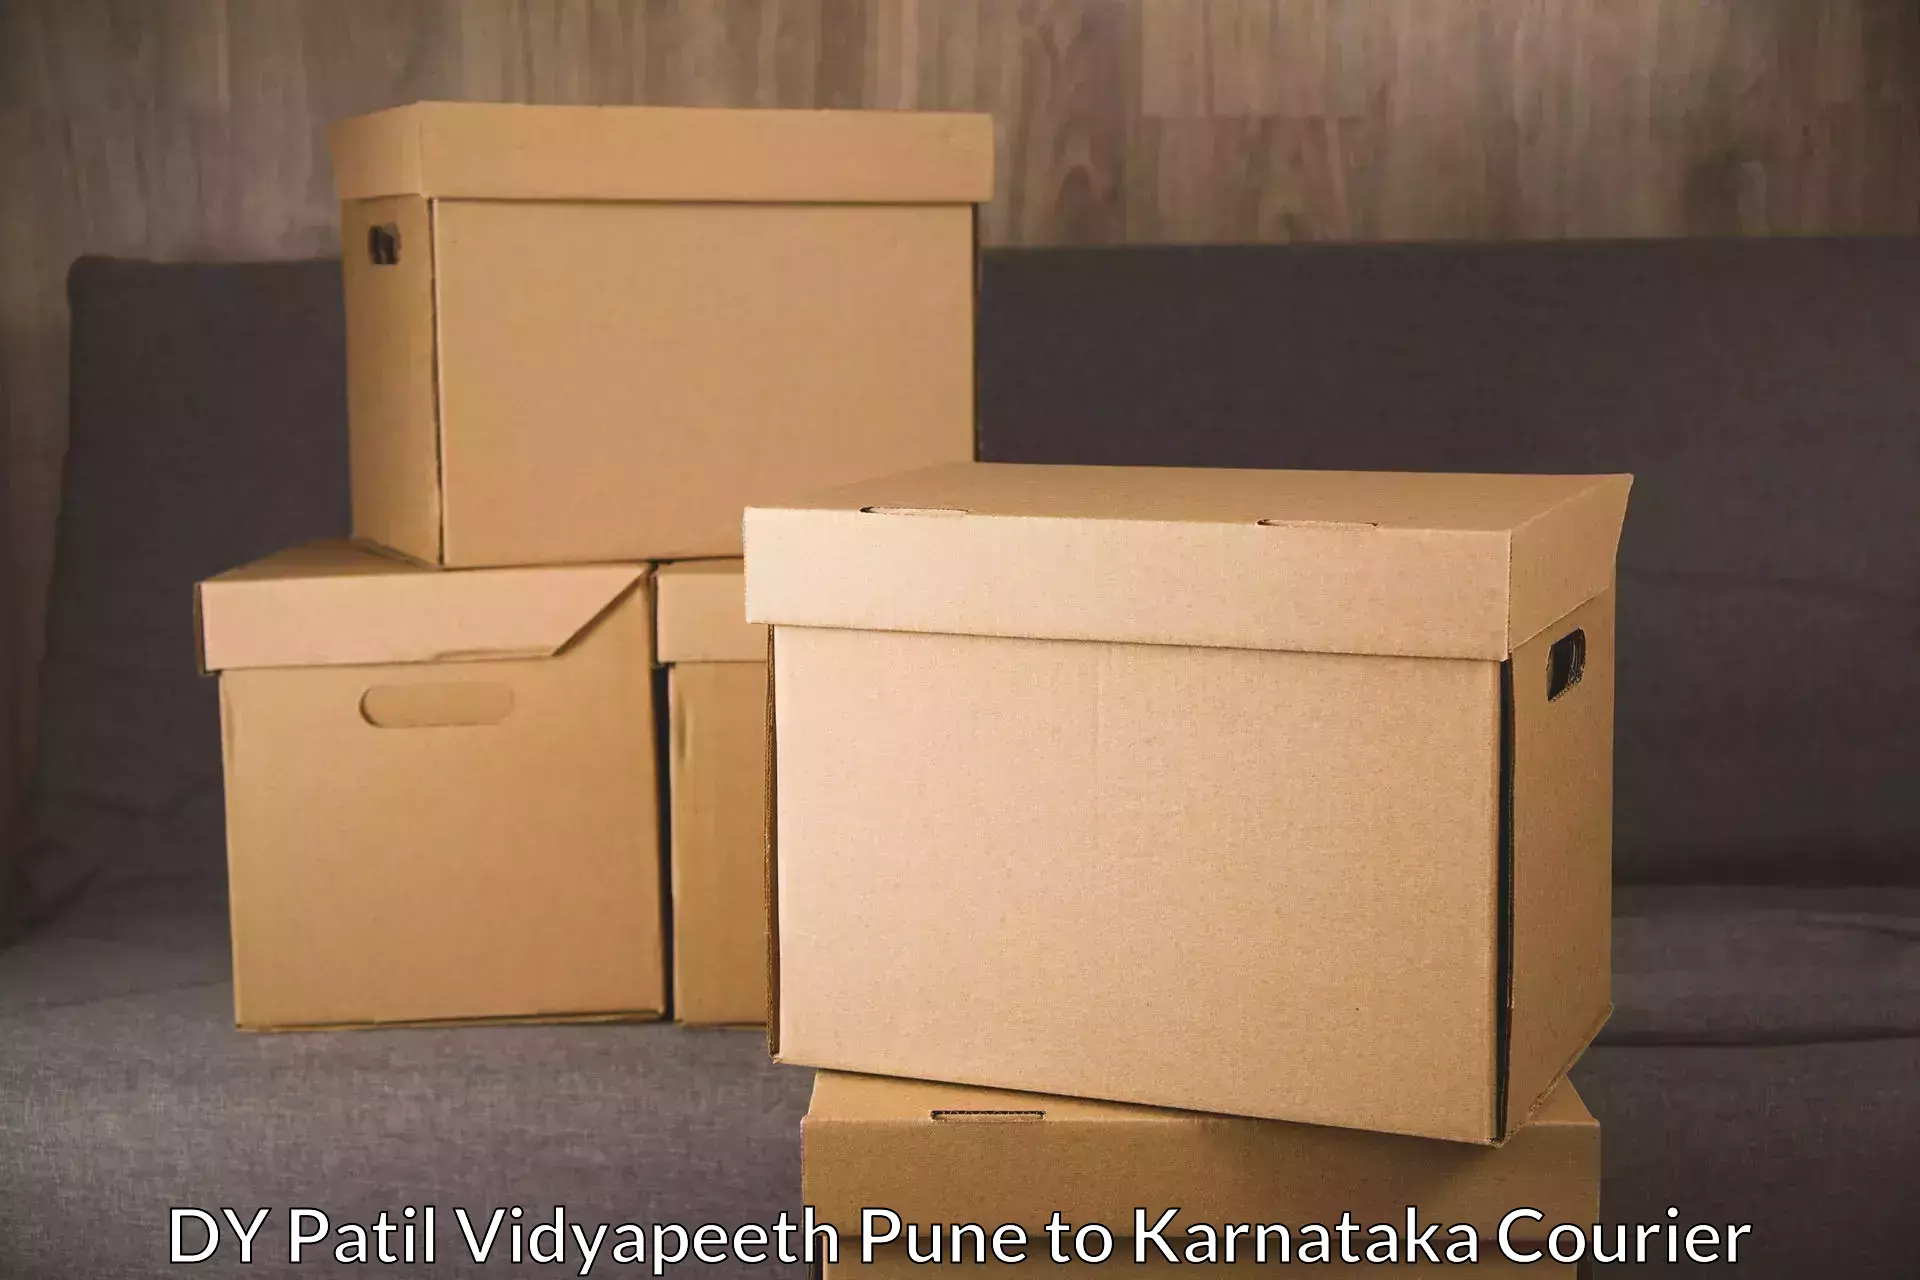 Specialized courier services in DY Patil Vidyapeeth Pune to Alnavar